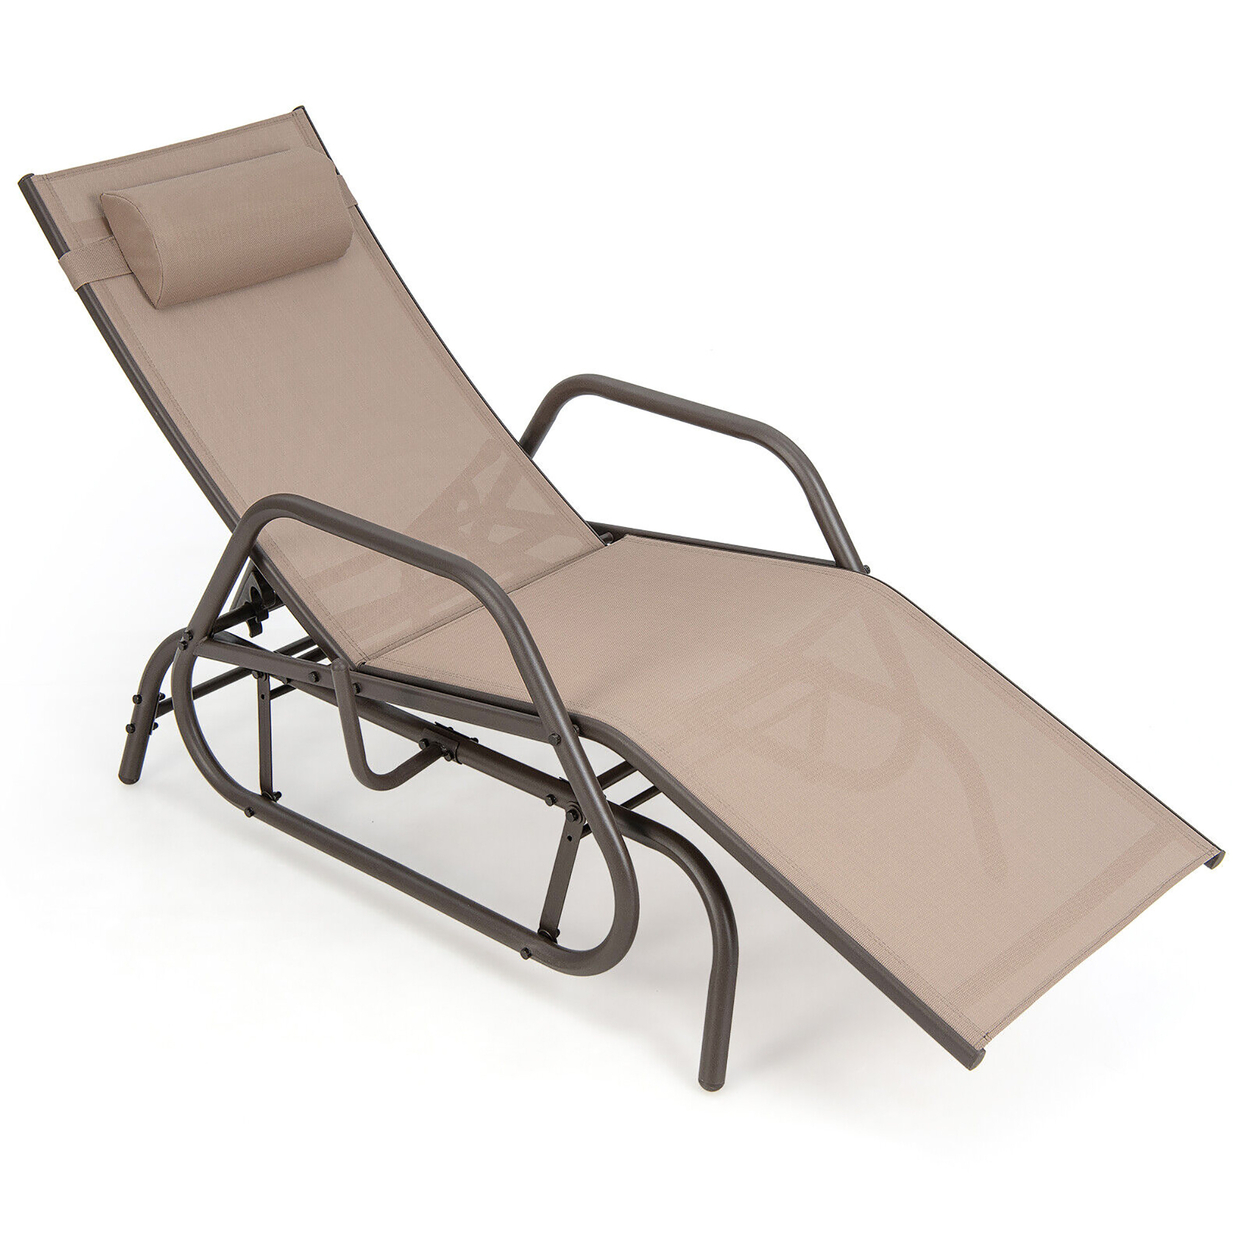 Patio Chaise Lounge Glider Recliner Chair Adjustable Sturdy Metal Frame Outdoor - Brown